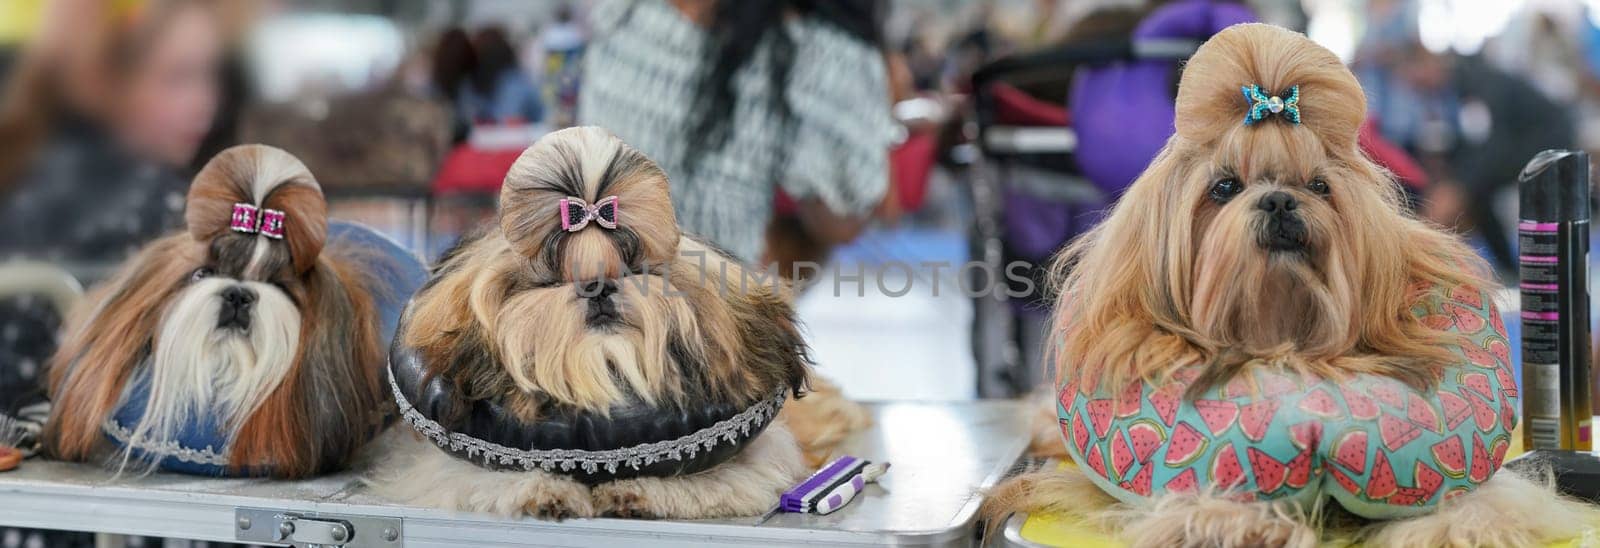 Group of Shih Tzu dogs, sitting on pillows, hairs getting groomed, colourful glittering bow clips top, at dog show contest by Ivanko